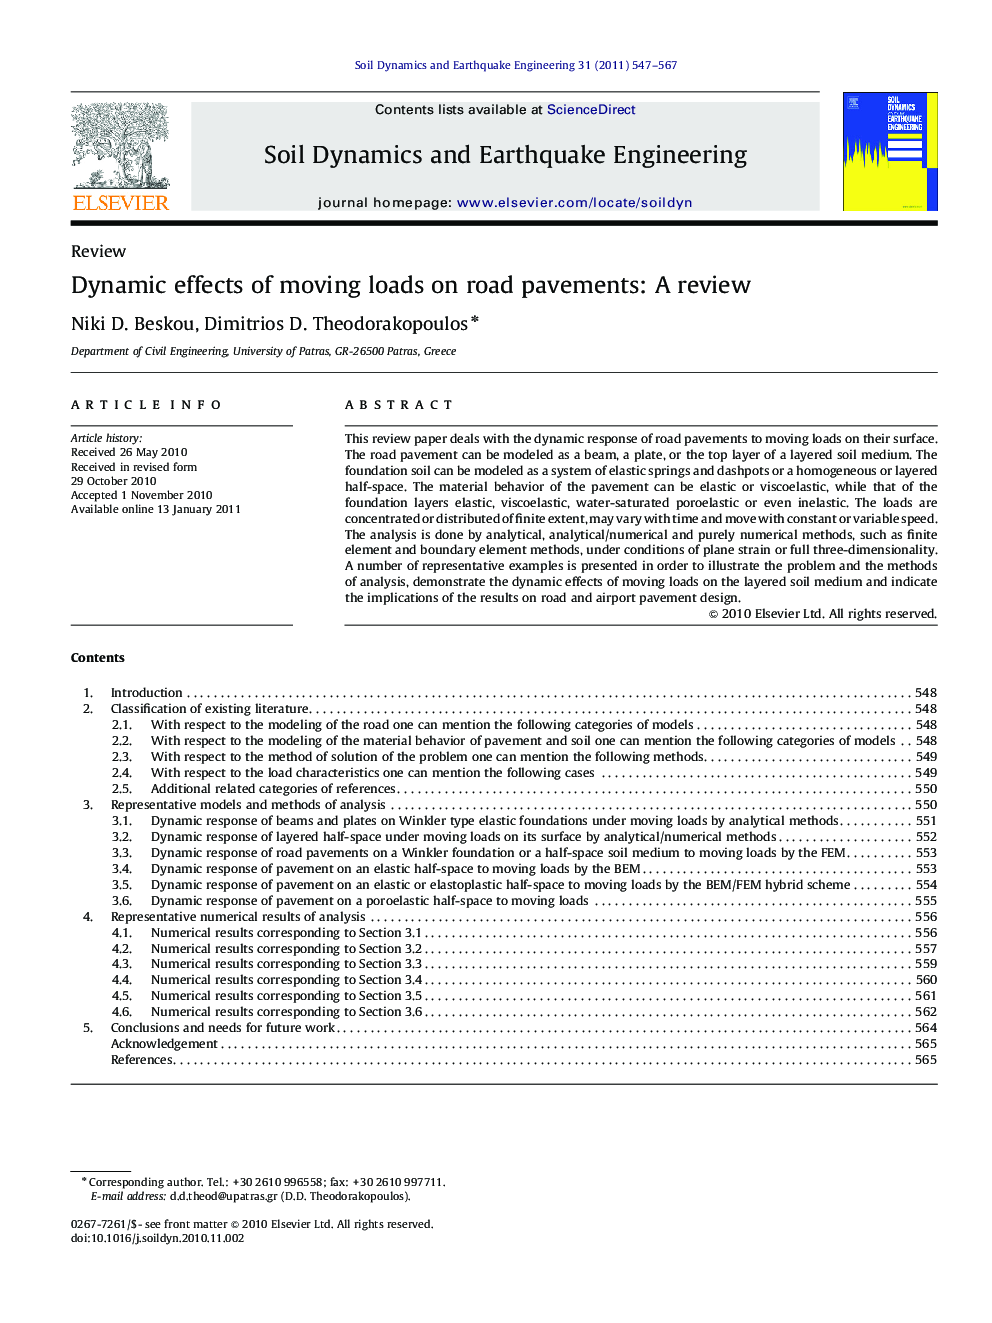 Dynamic effects of moving loads on road pavements: A review